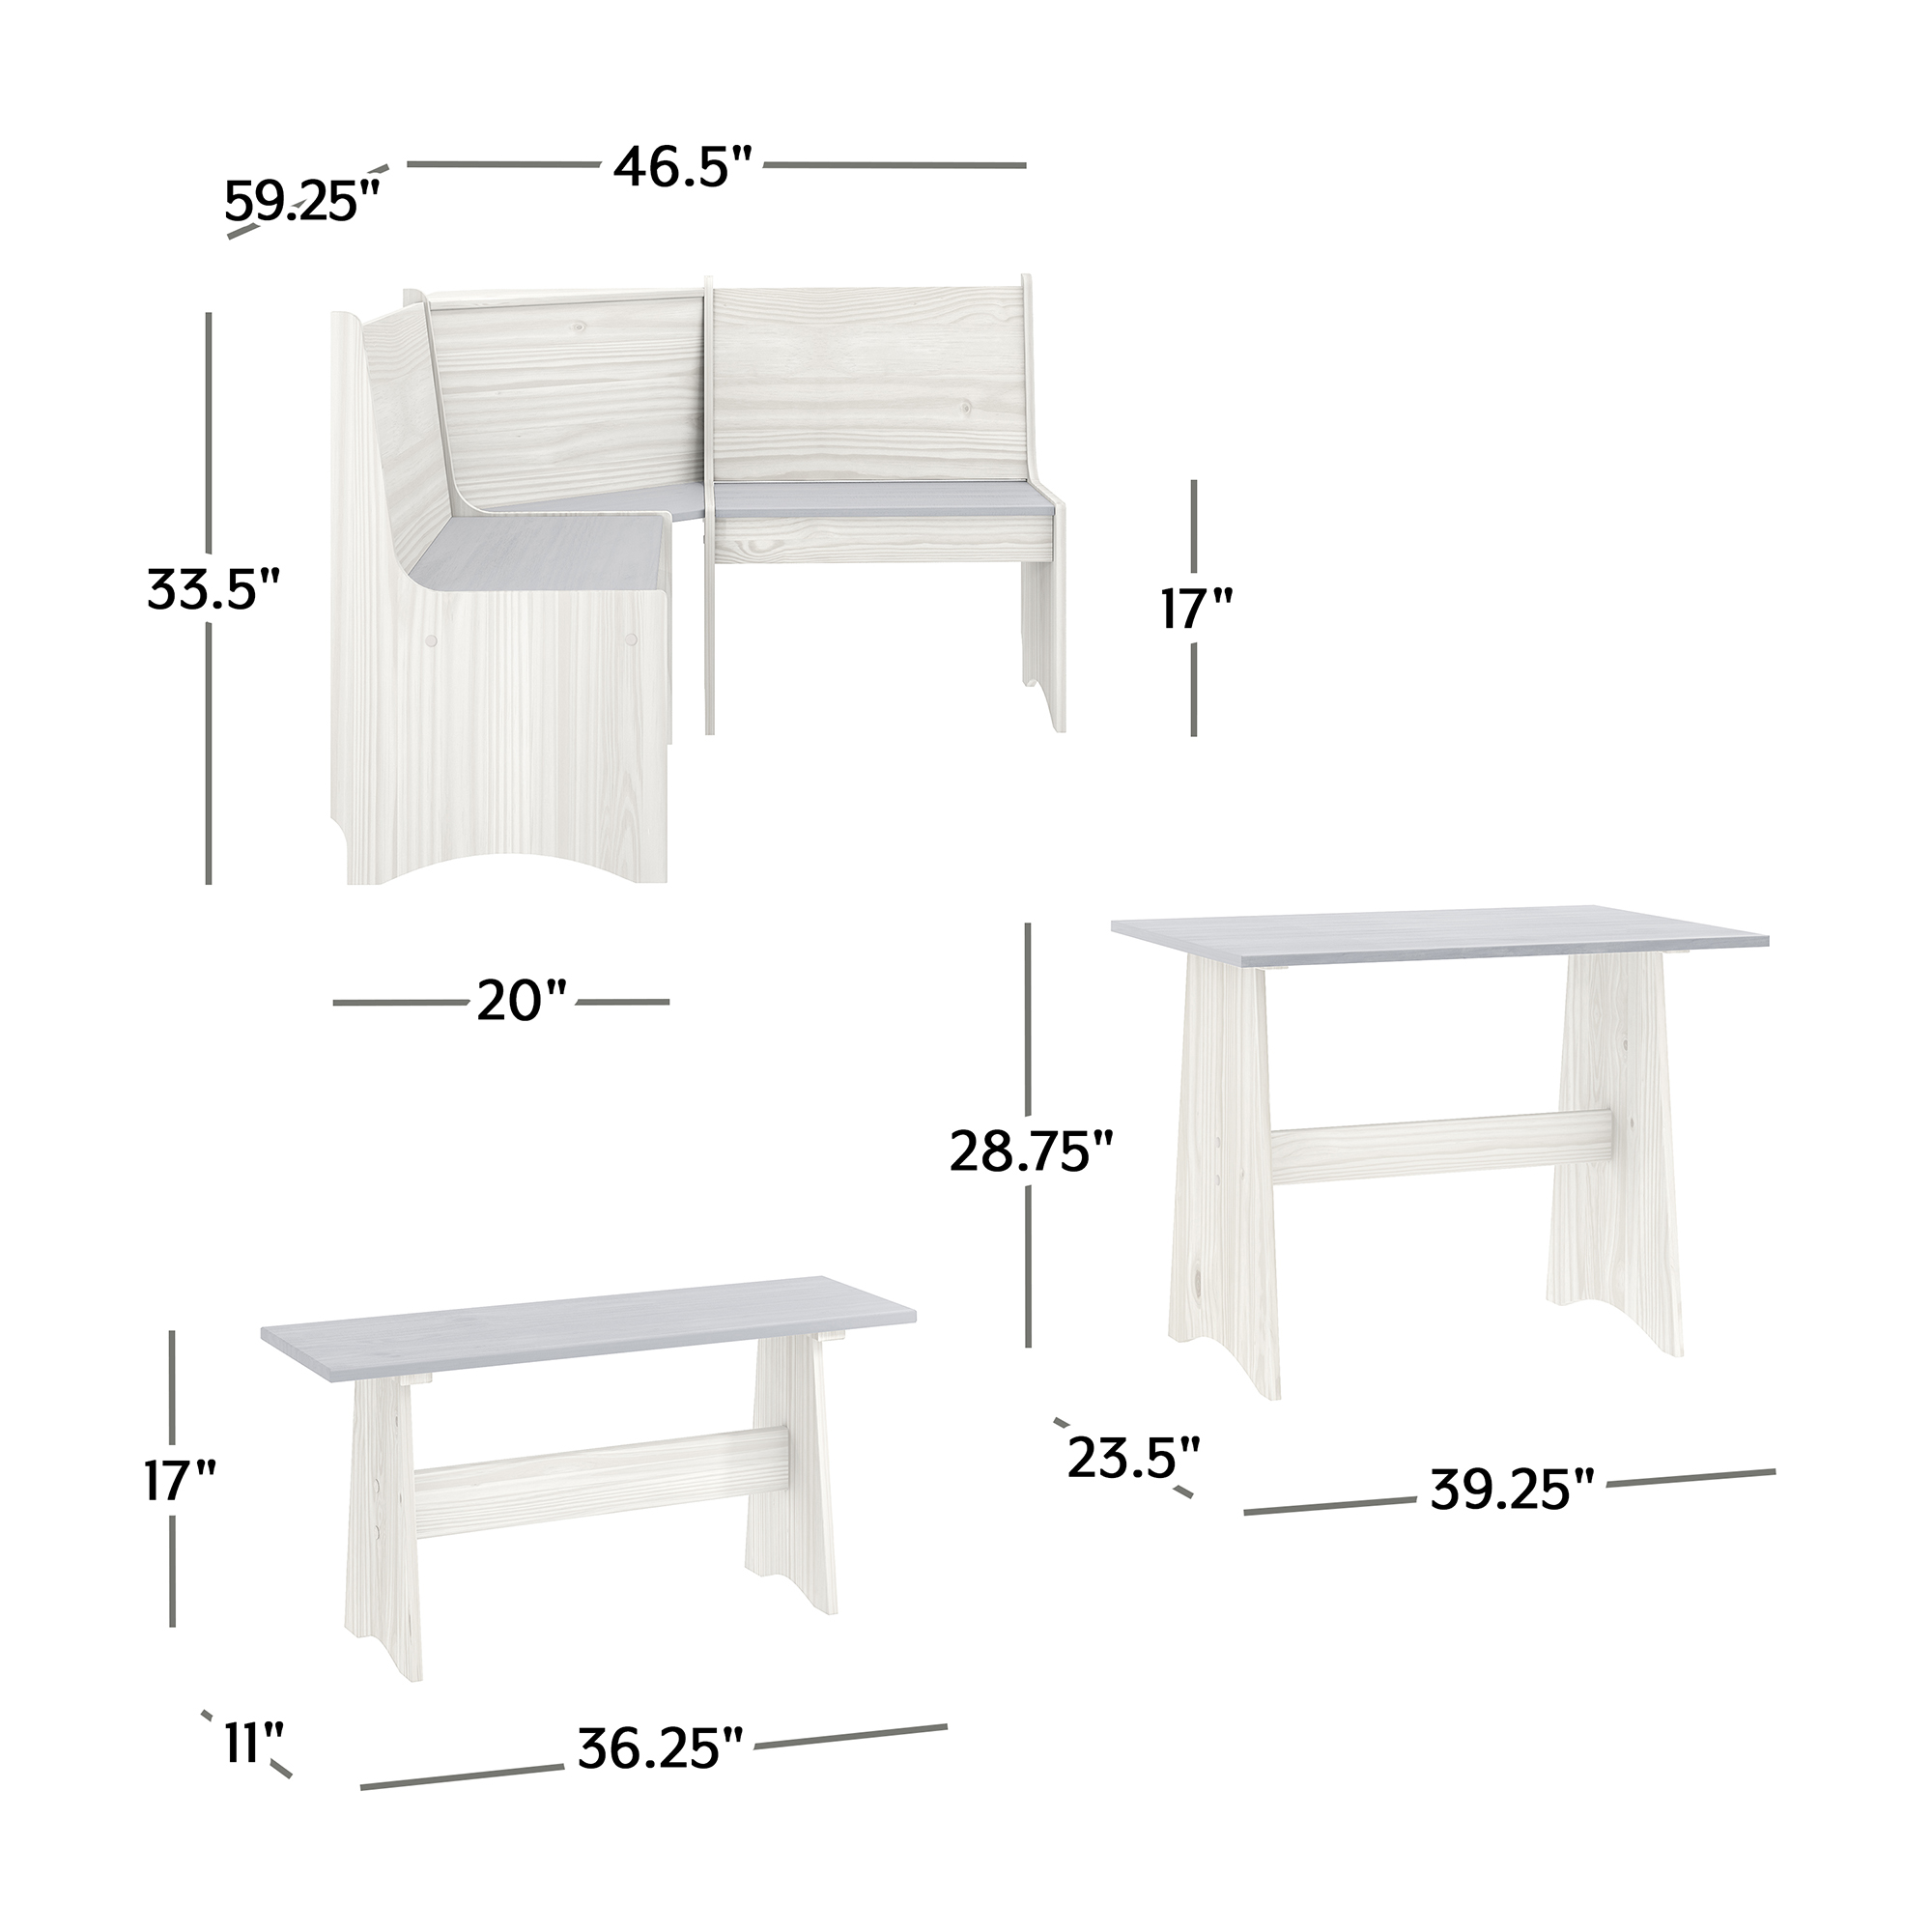 Woven Paths Cottonwood 3-Piece Small Spaces Wood Dining Nook, White/Gray - image 3 of 9